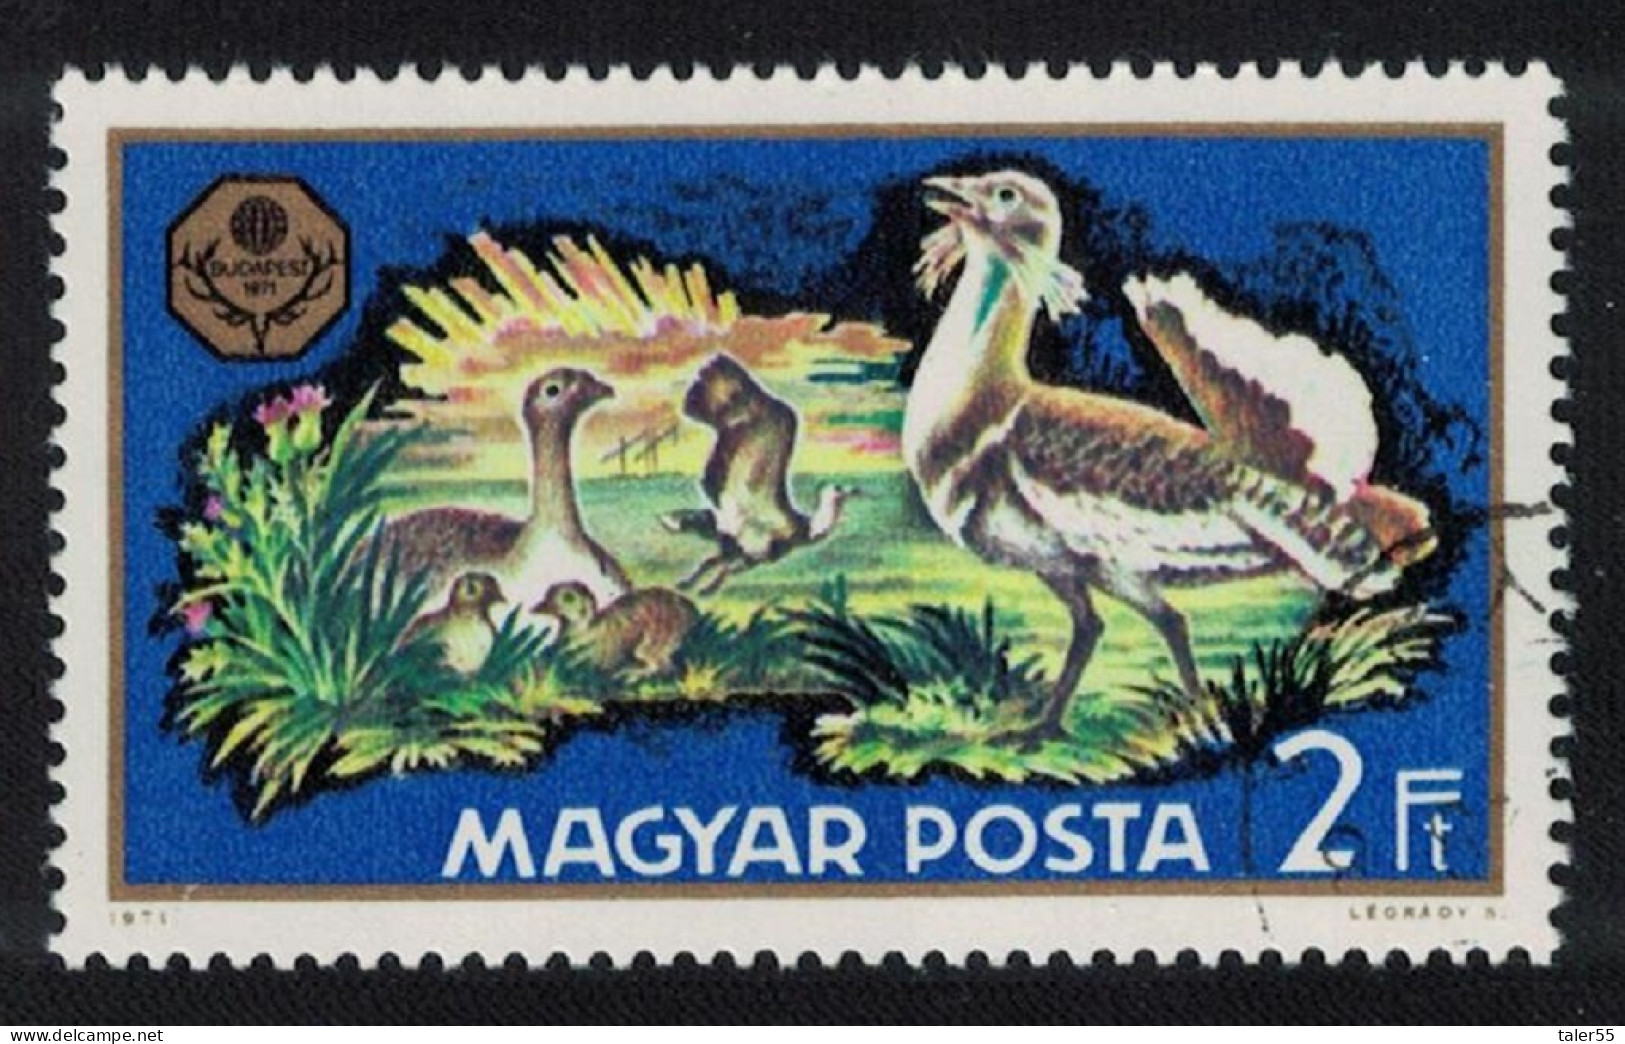 Hungary Great Bustards With Young Birds 2Ft 1971 Canc SG#2588 Sc#2071 - Gebraucht